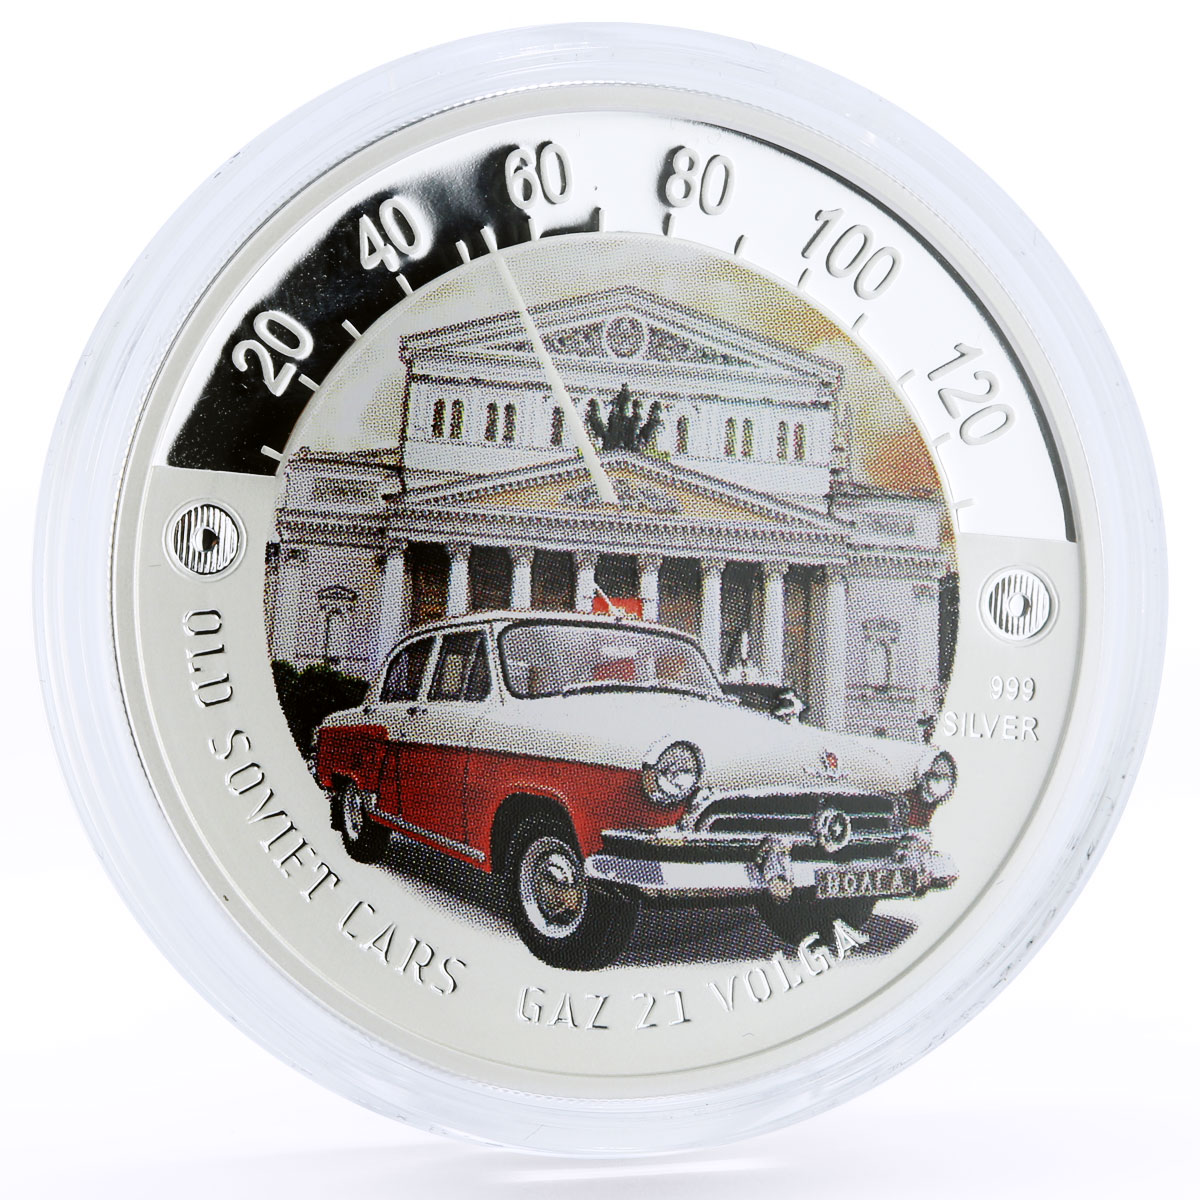 Niue set of 4 coins Old Soviet Cars colored silver coins 2010